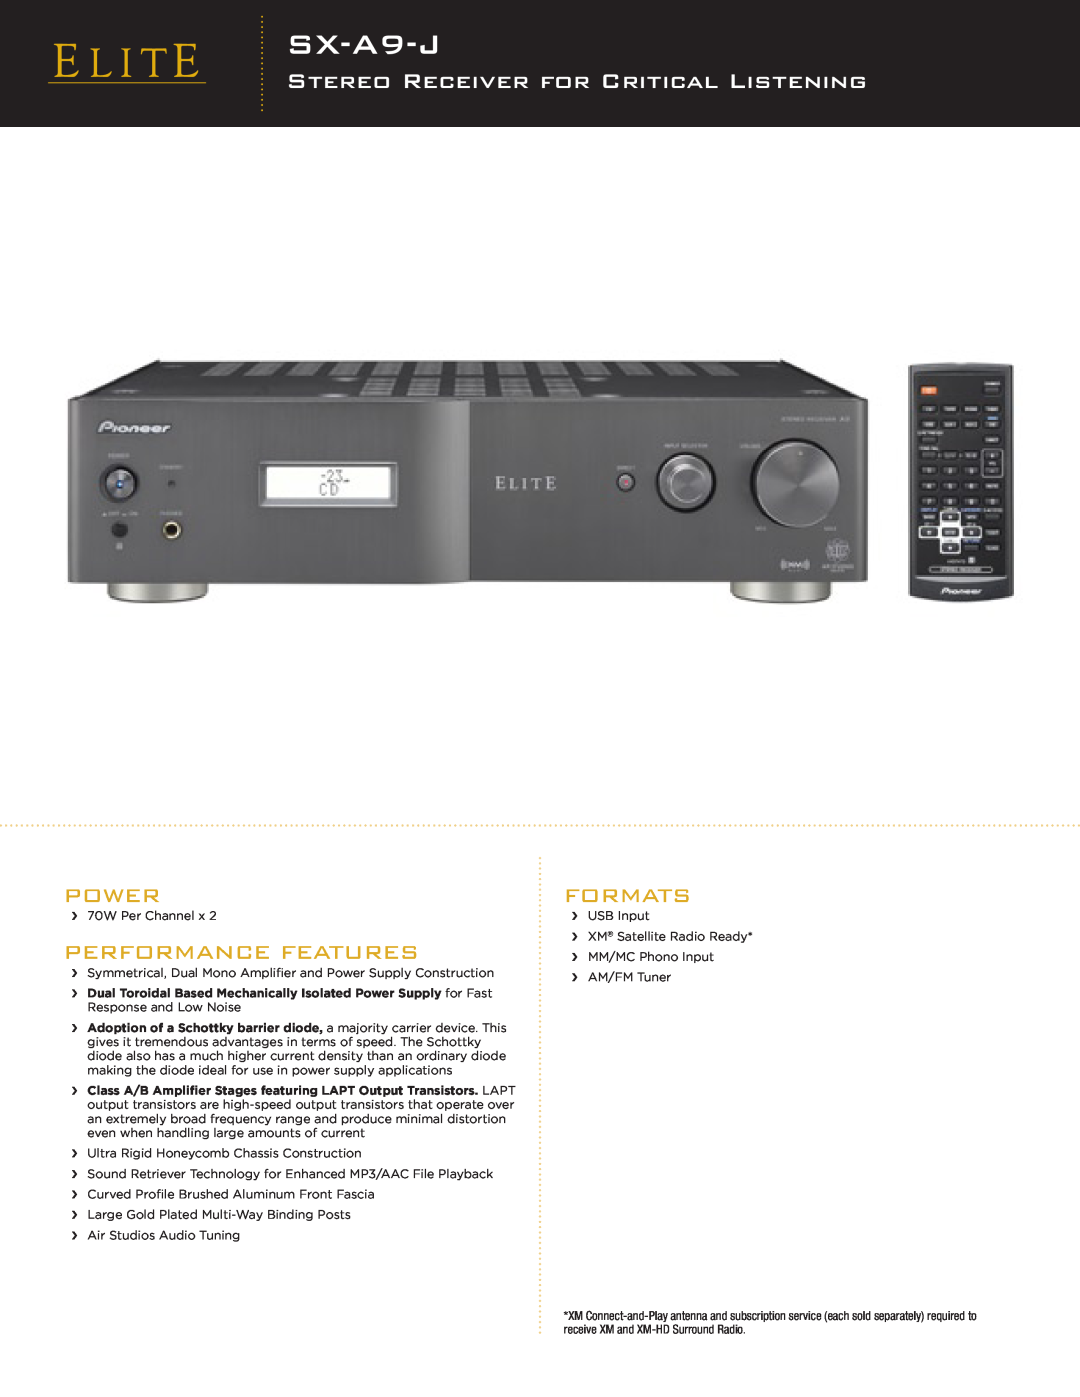 Elite SX-A9-J manual Stereo Receiver For Critical Listening, Power, Performance Features, Formats 